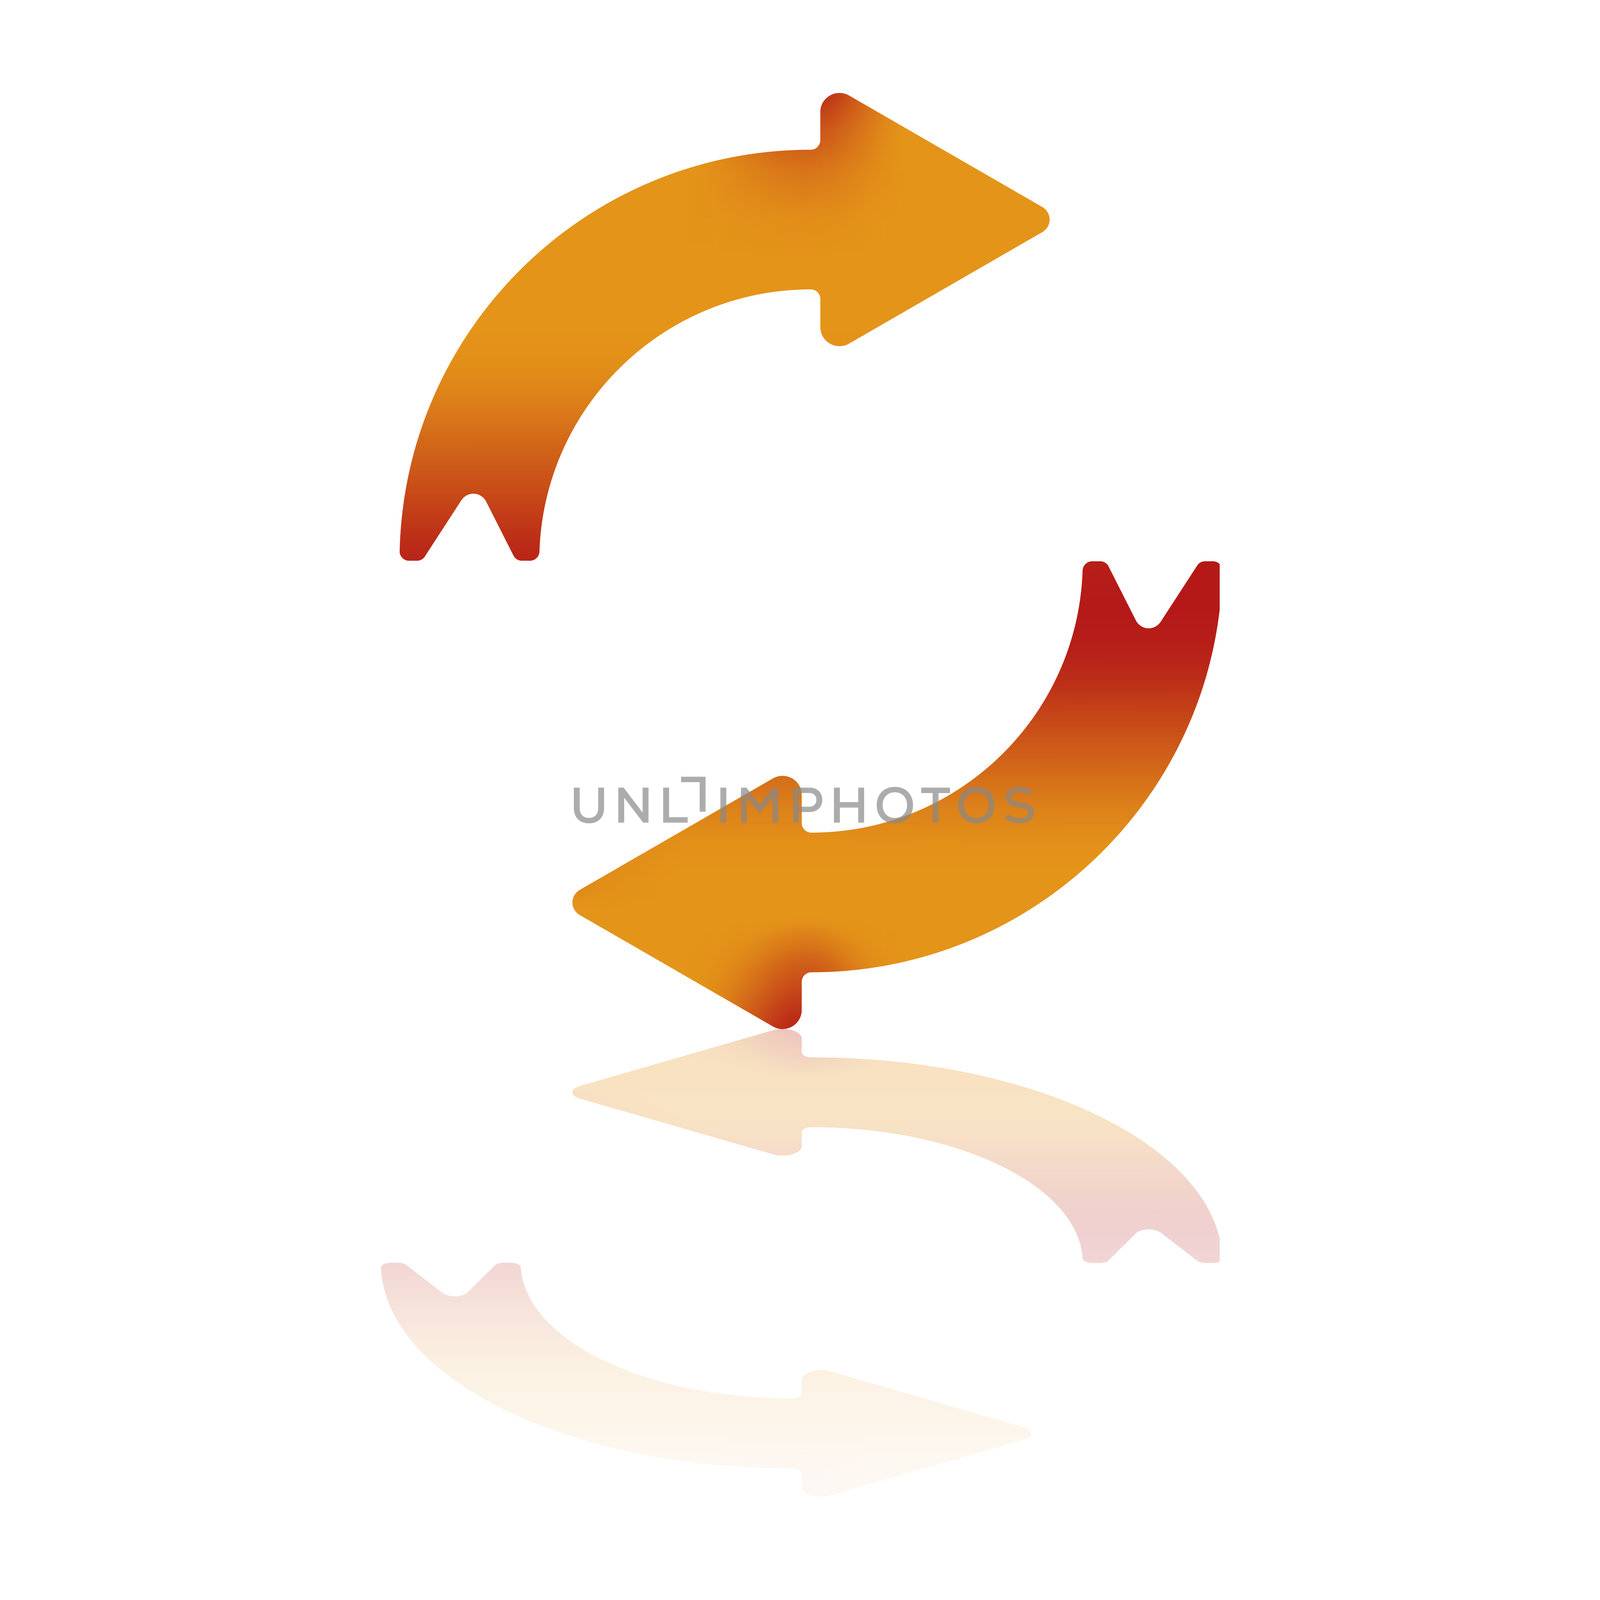 Two Gradient Arrows Depicting Clockwise Motion With Reflection